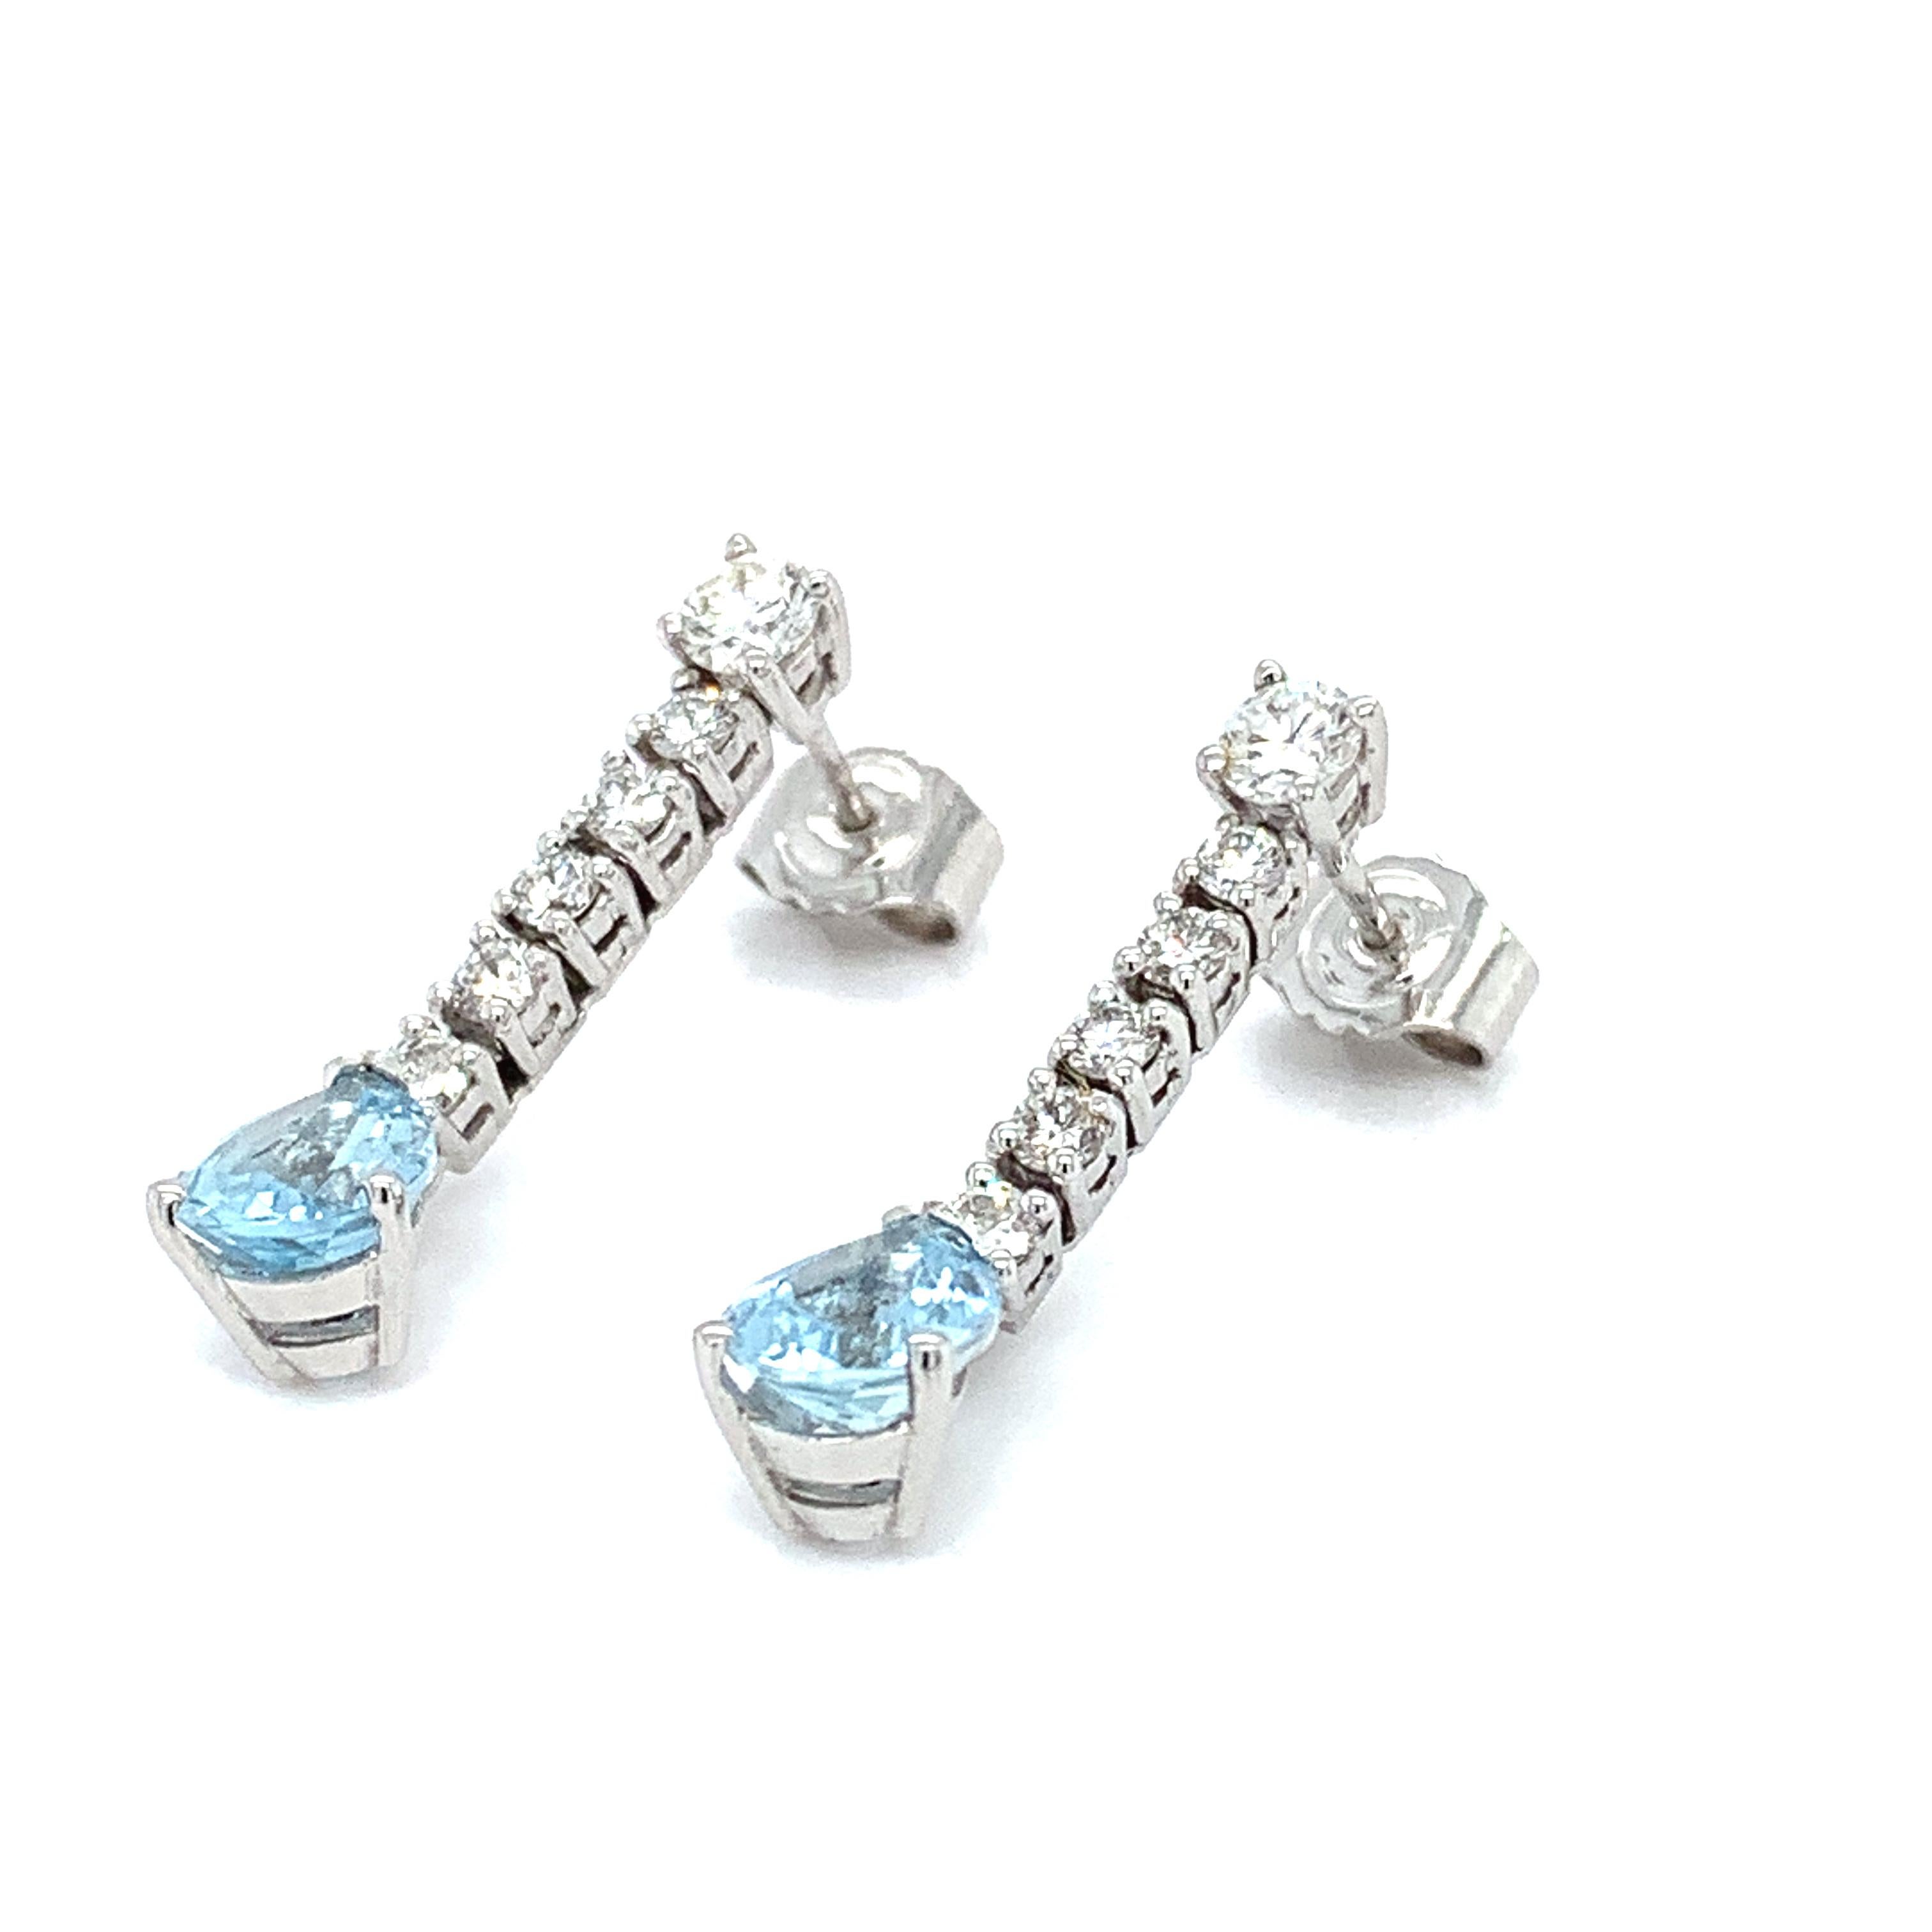 Aquamarine diamond drop earrings 18k white gold In New Condition For Sale In London, GB